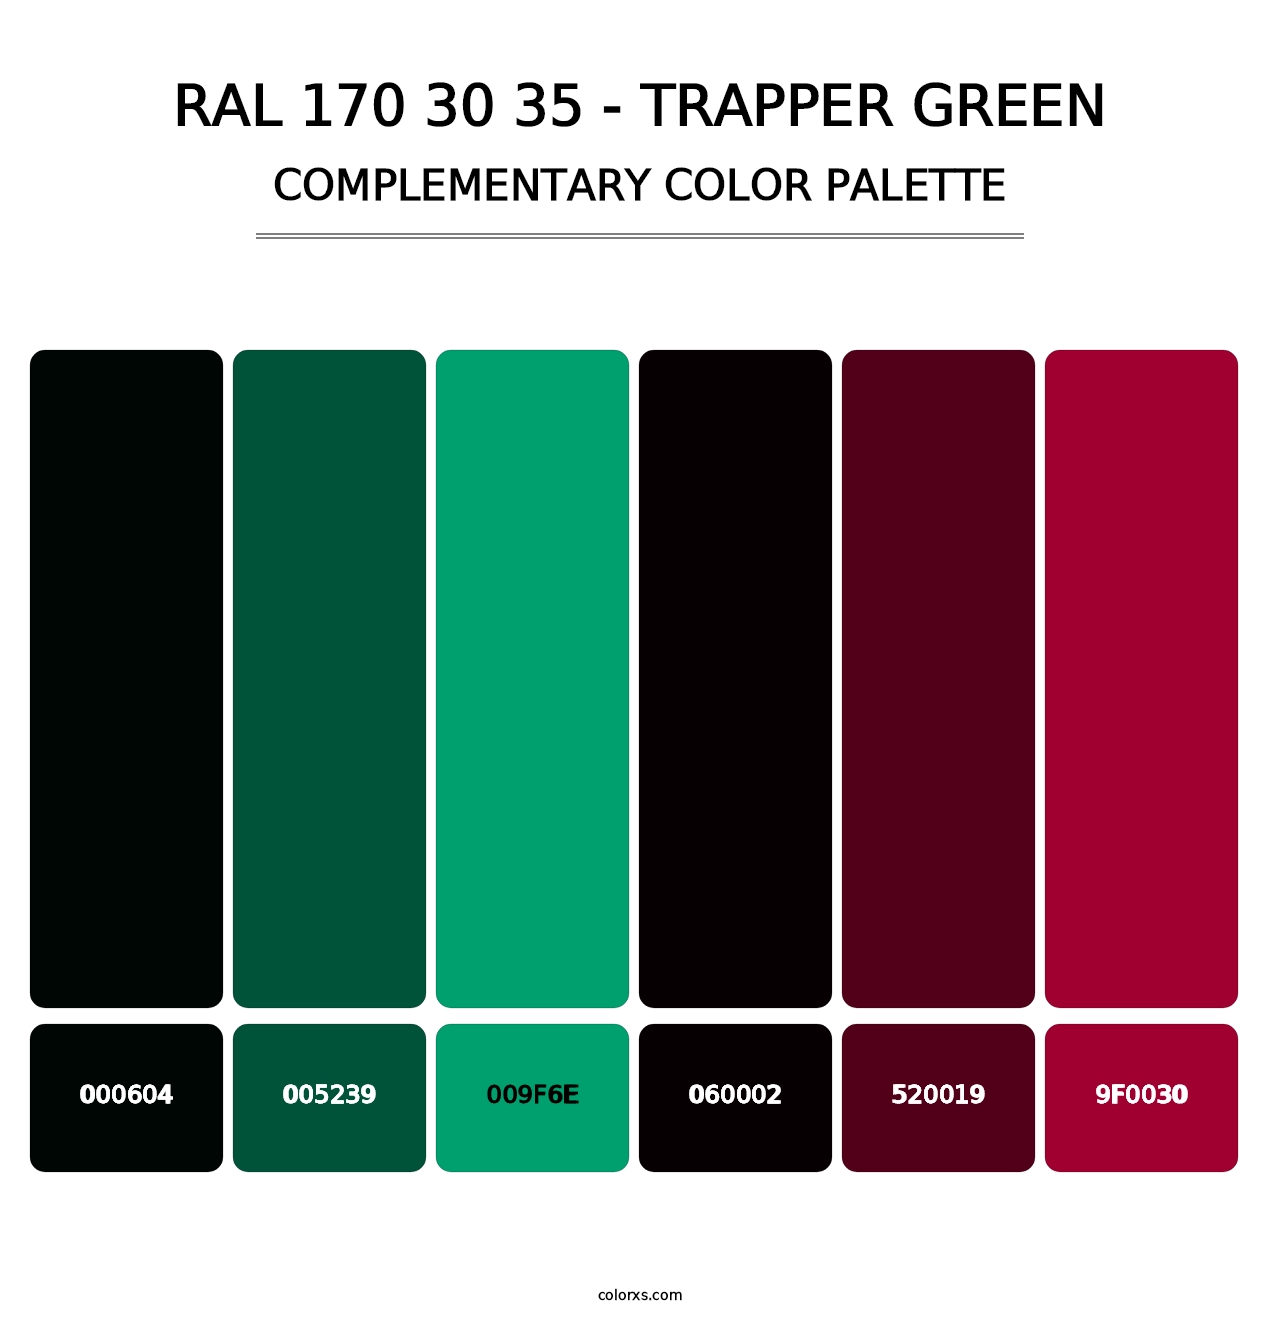 RAL 170 30 35 - Trapper Green - Complementary Color Palette